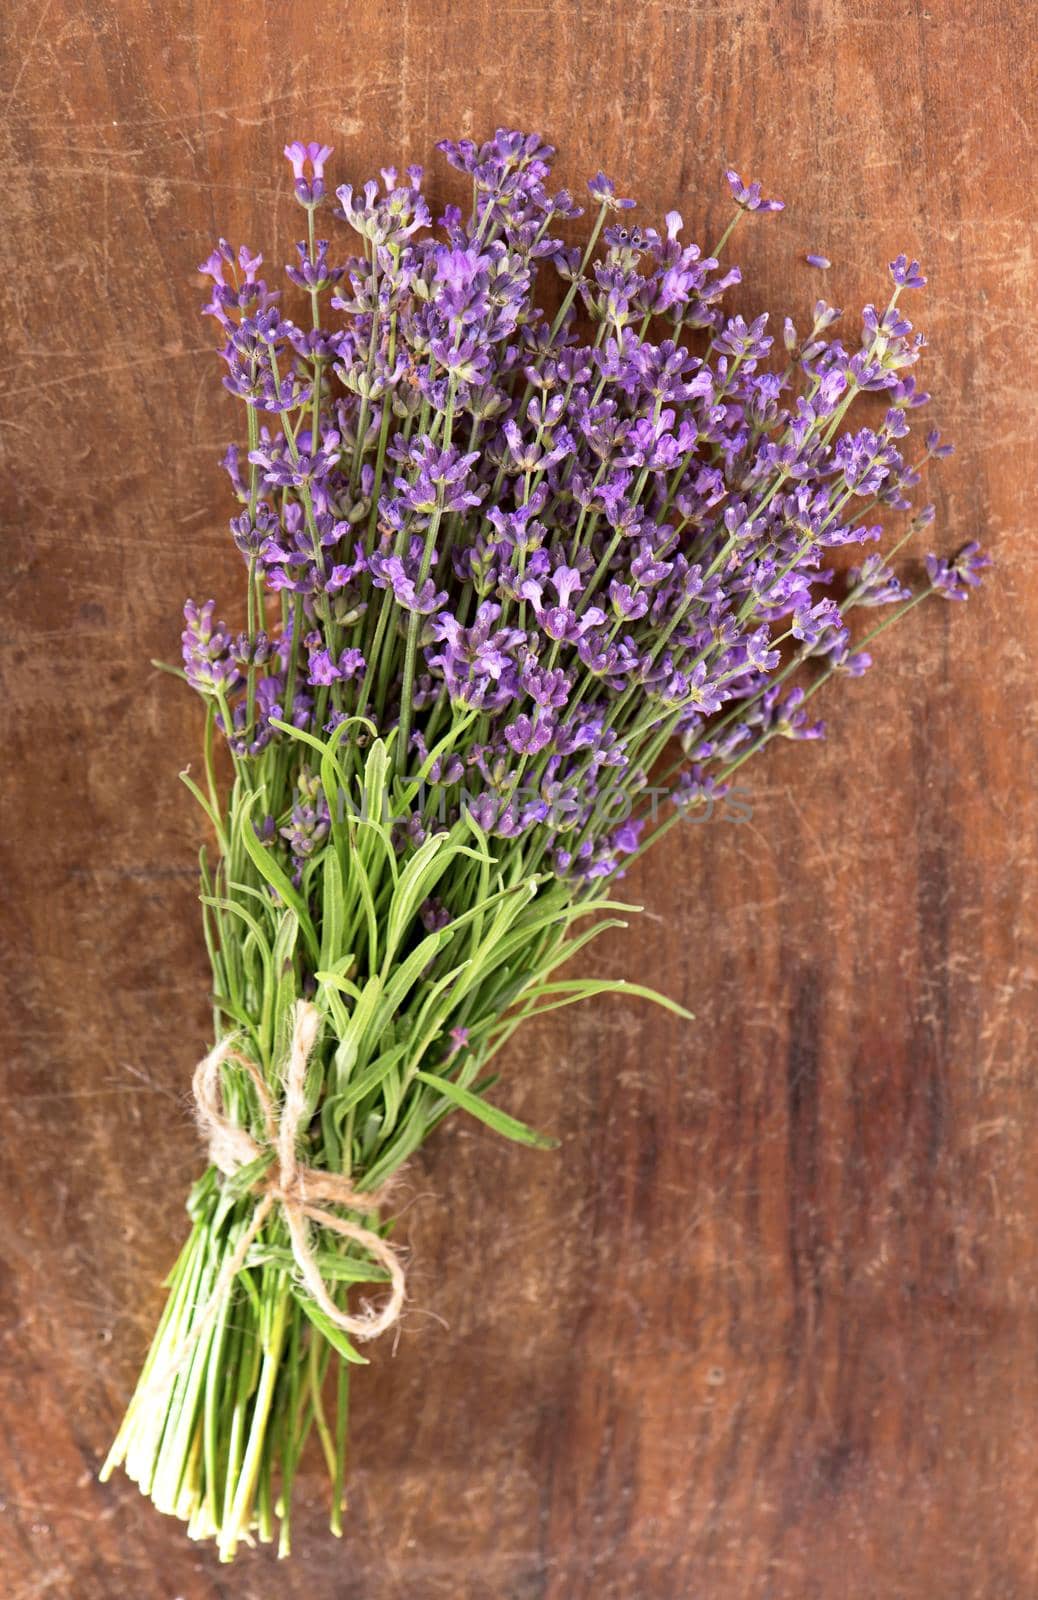 Branch of a lavenderon a wooden table by aprilphoto